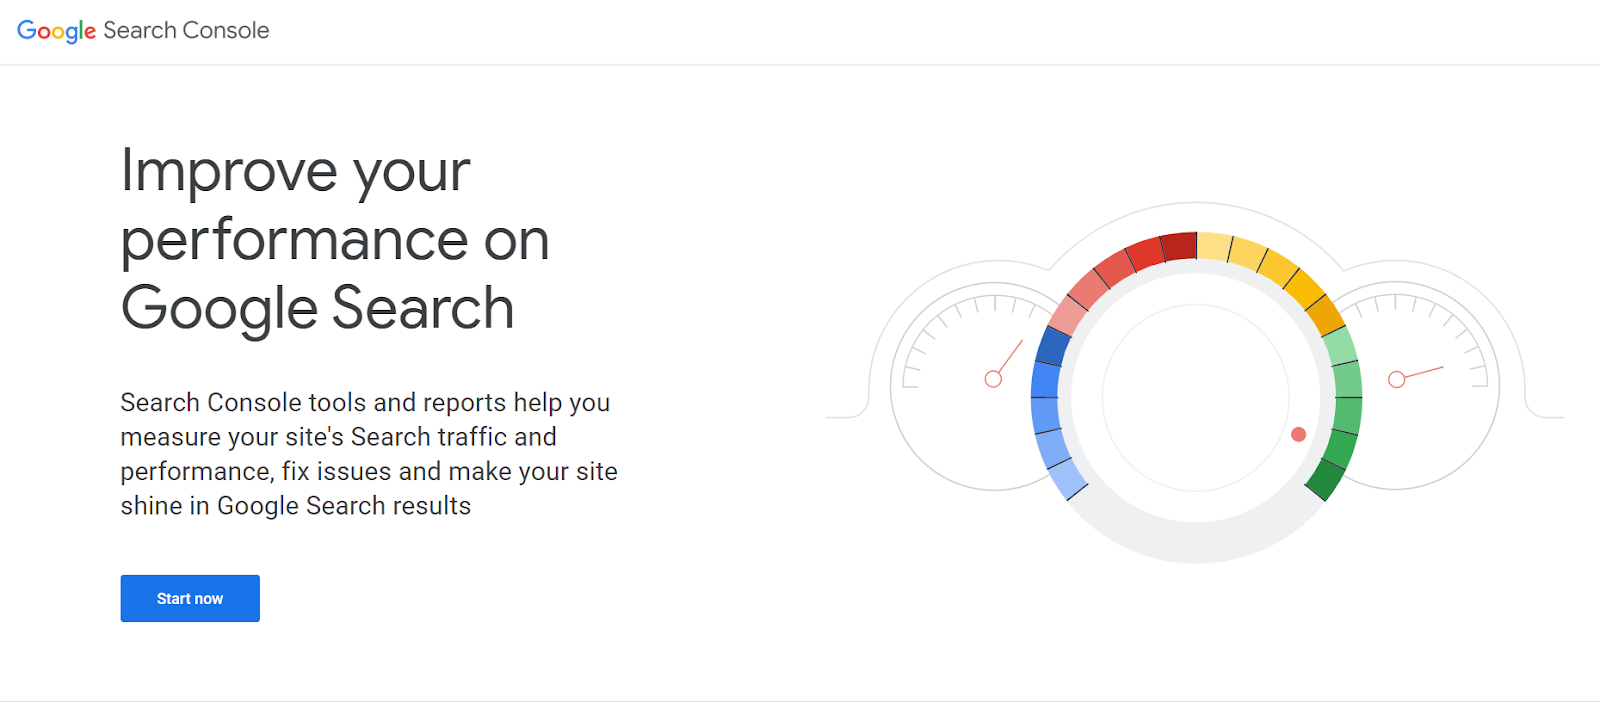 Google Search Console SEO工具主页截图